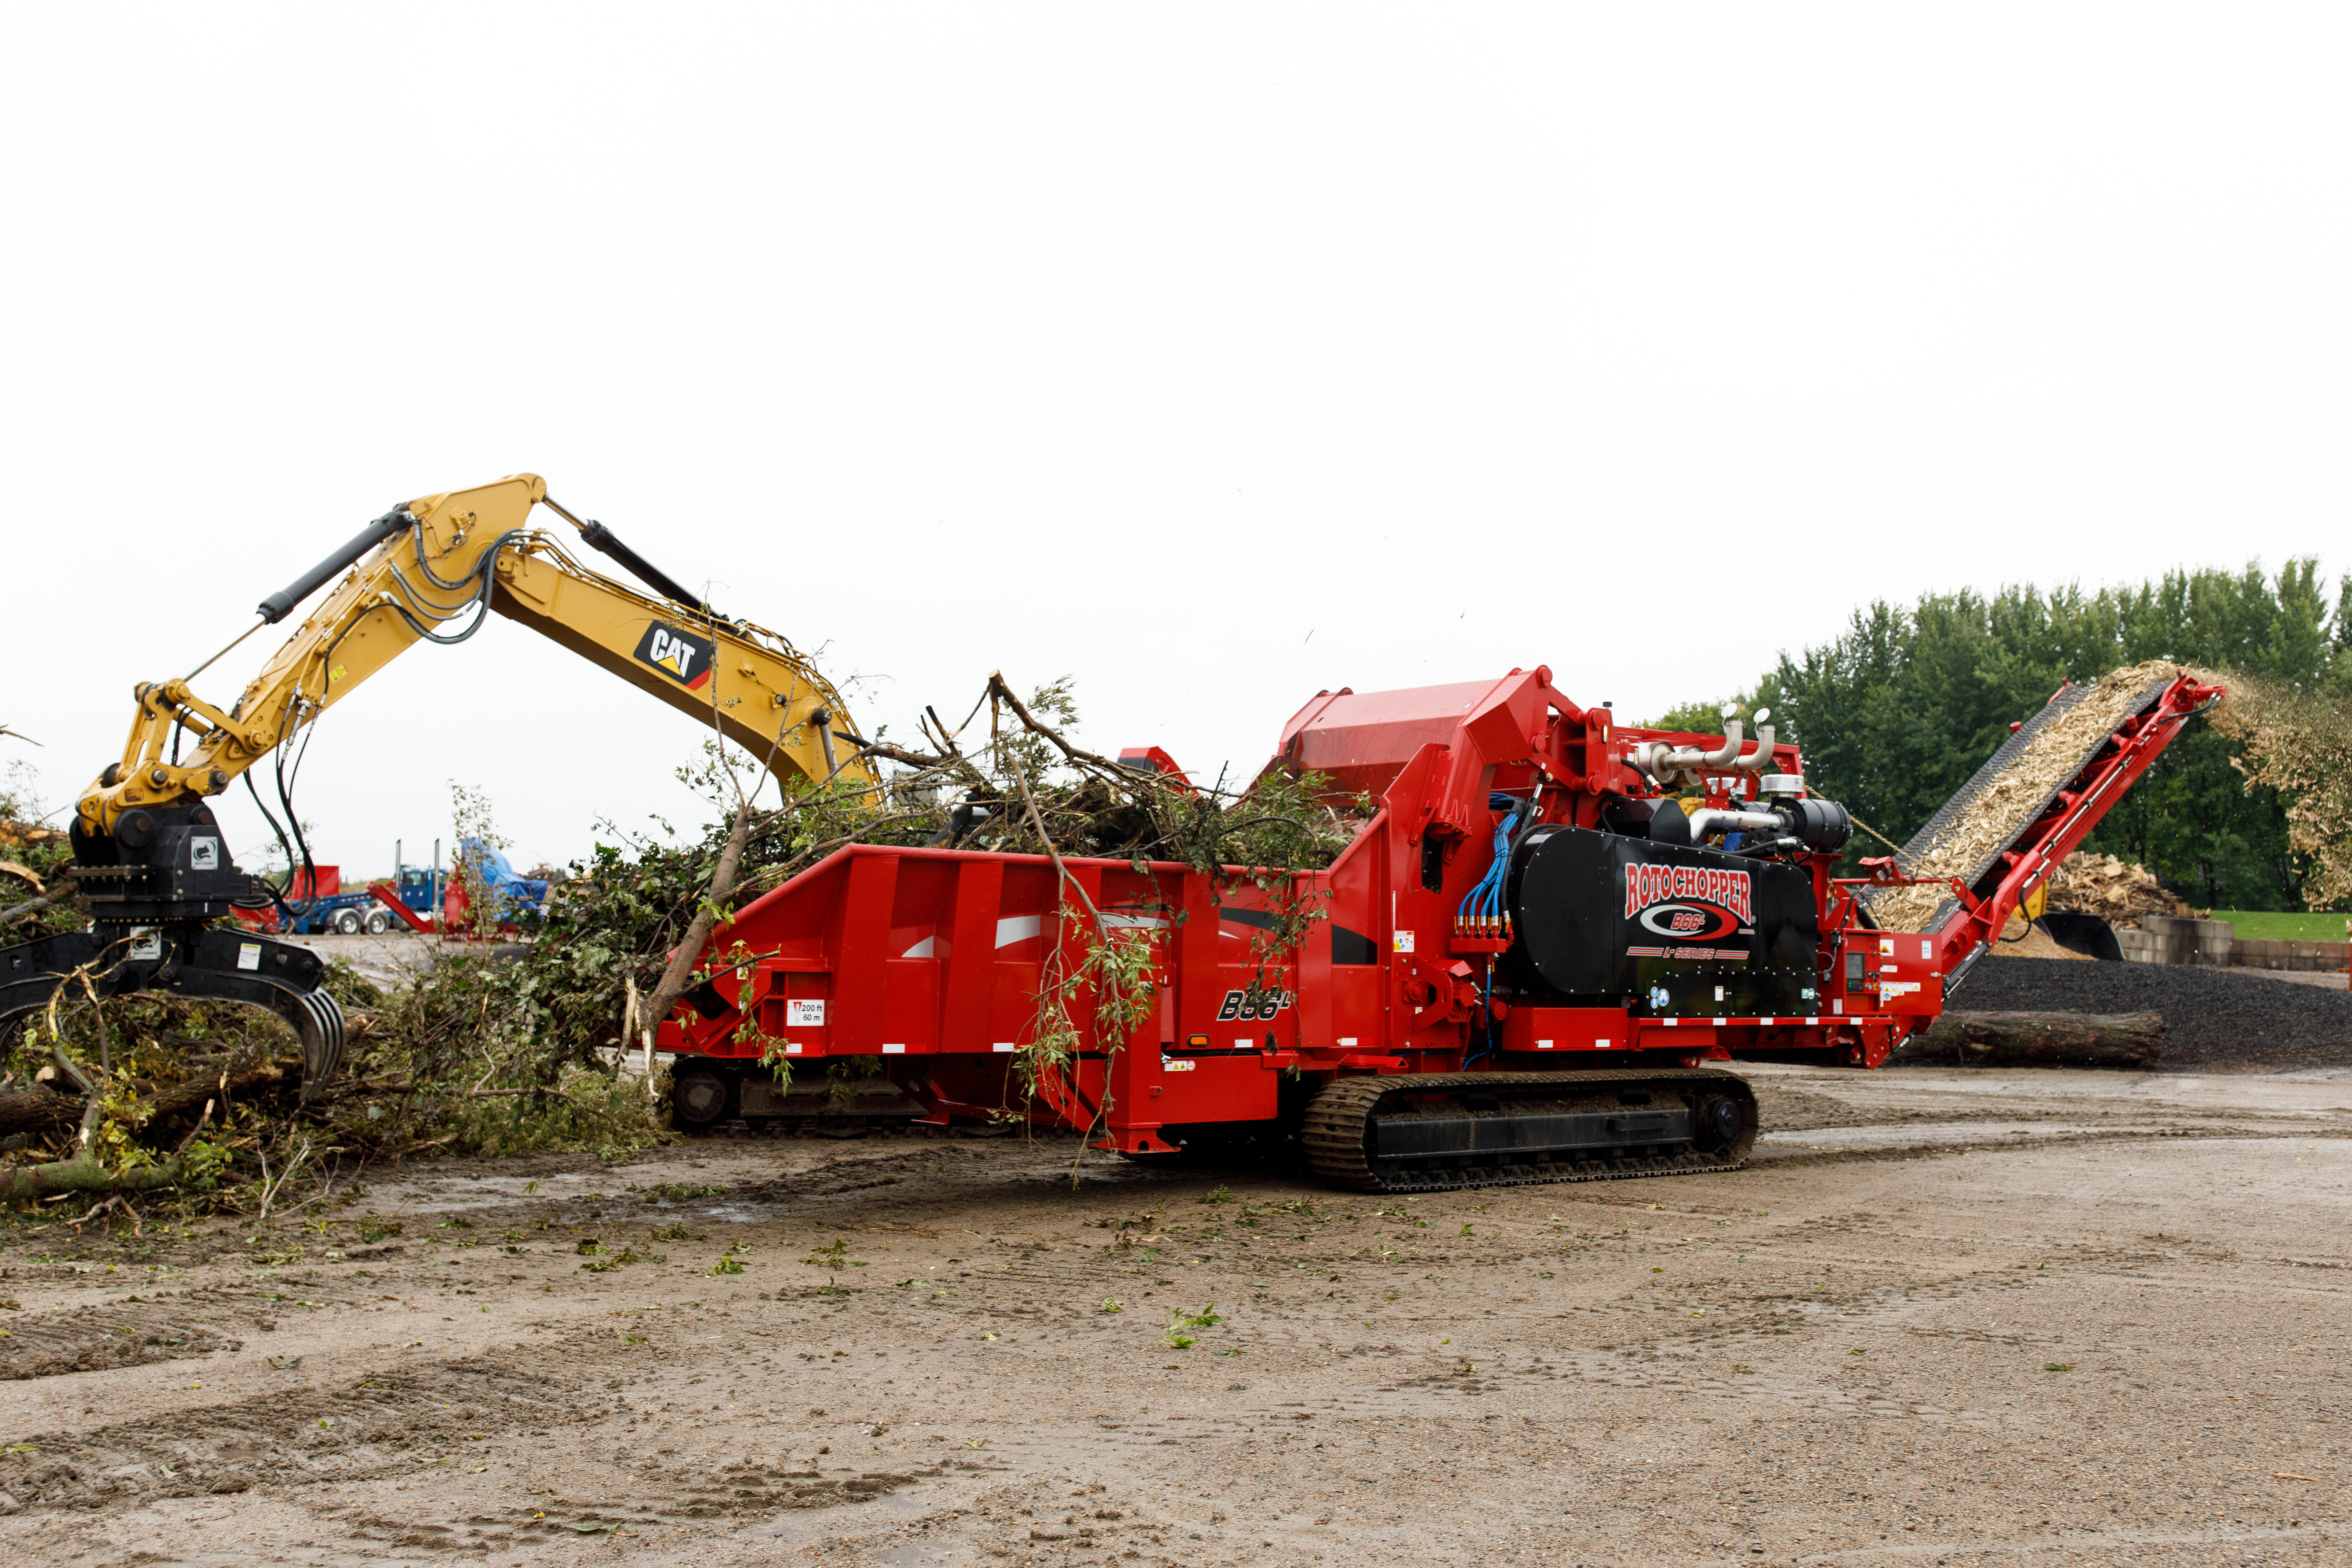 A large grinding machine demonstrates how easily it can grind trees into tiny pieces during Rotochopper's demo day event.